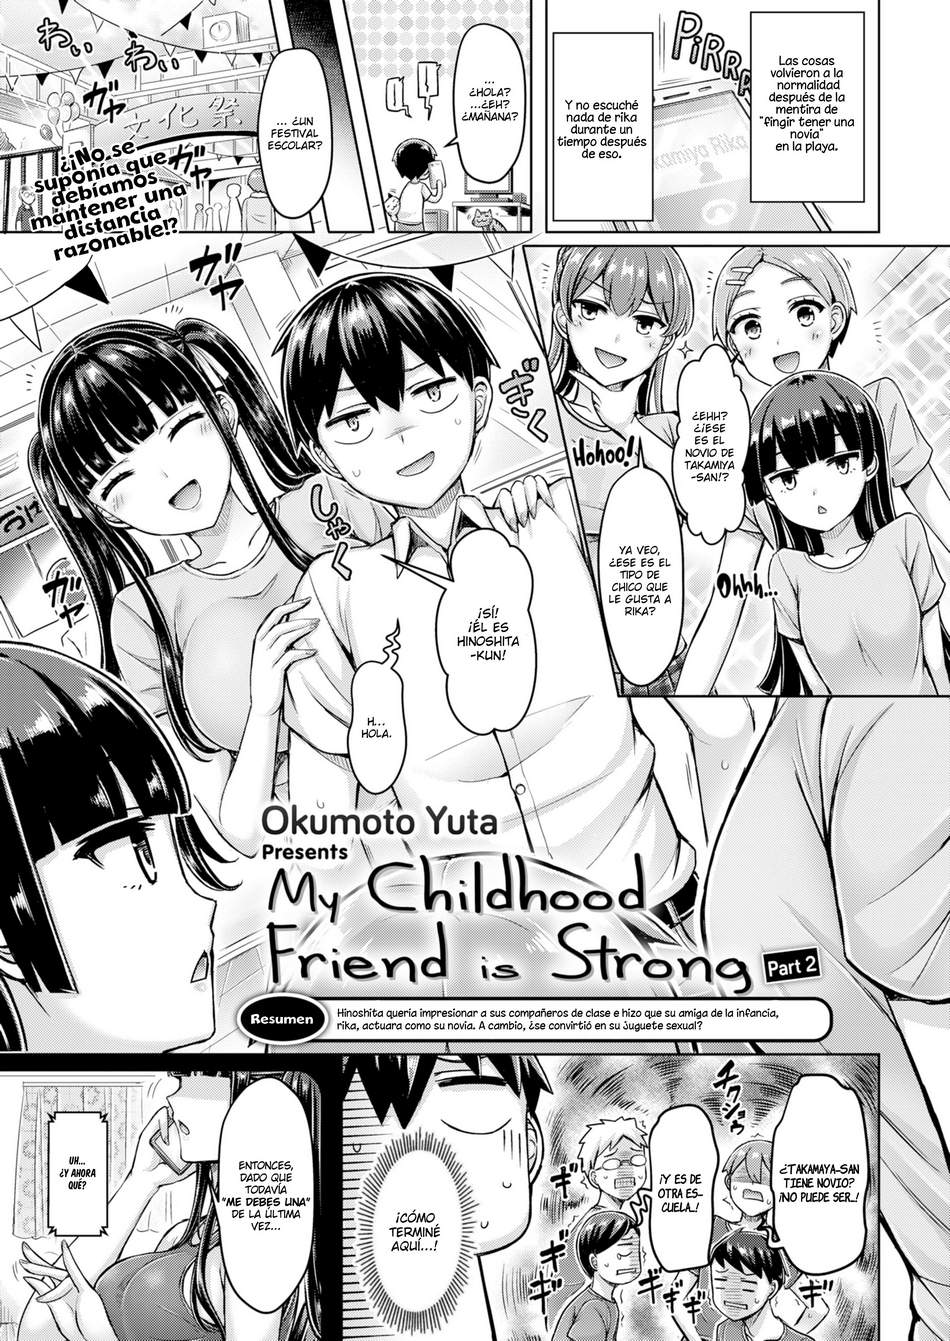 My Childhood Friend is Strong #2 - Page #1